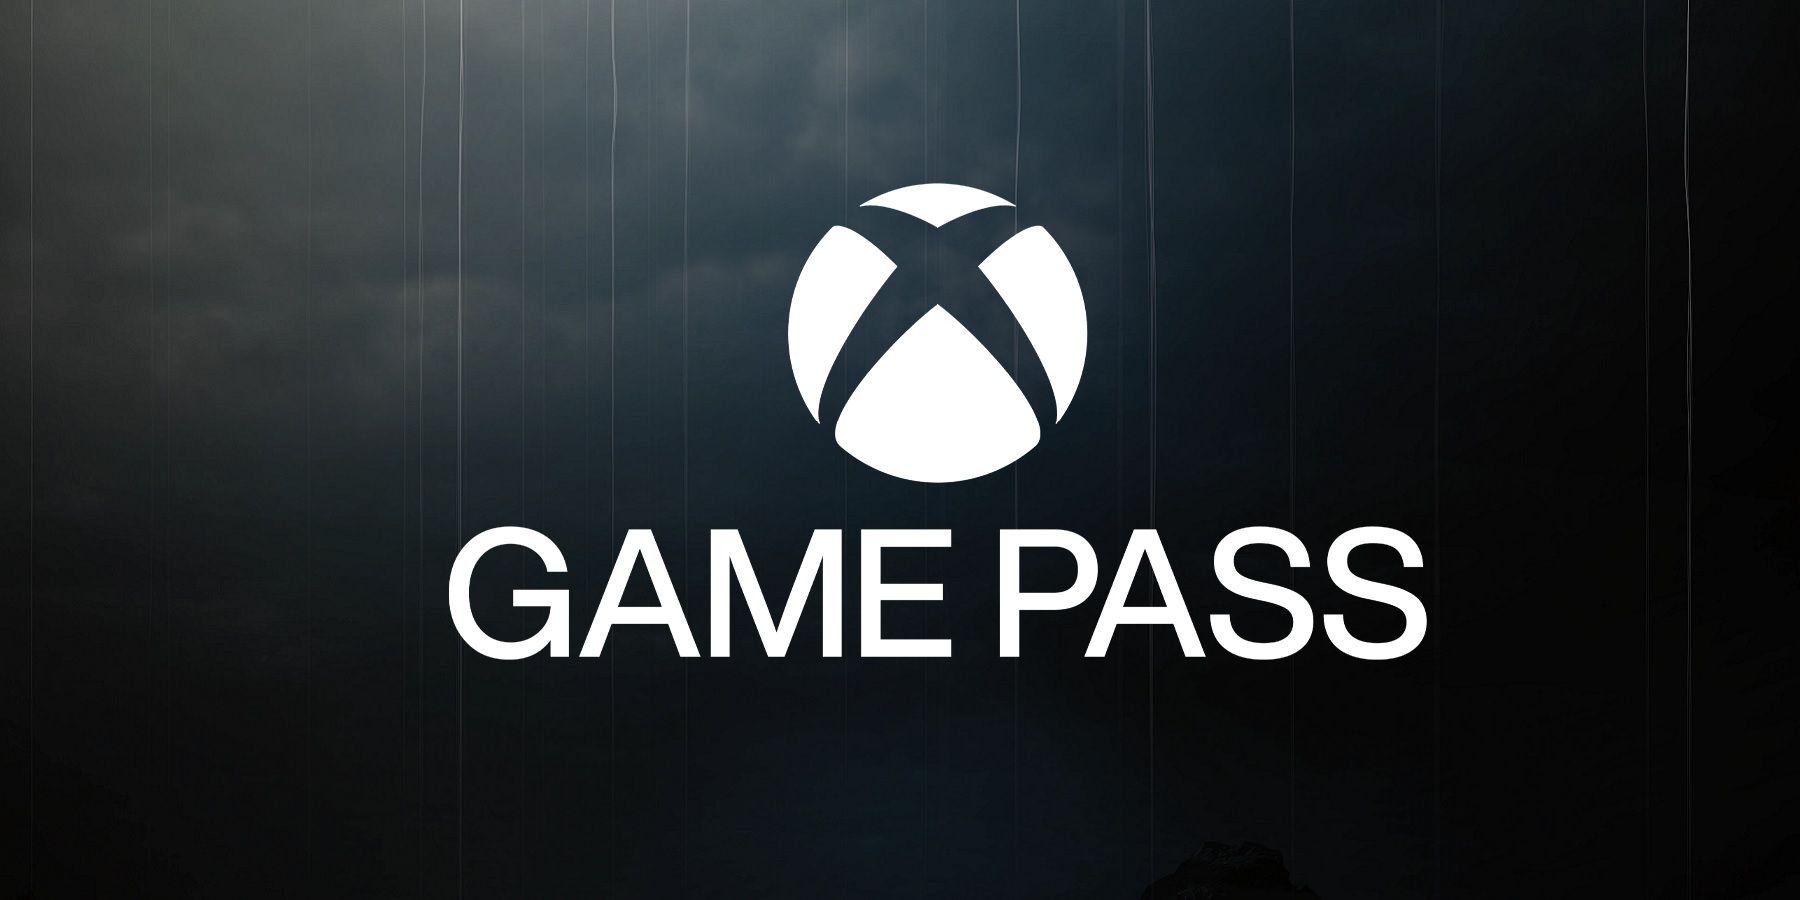 Rygter: Game Pass kunne tilføje PlayStation Console Exclusive